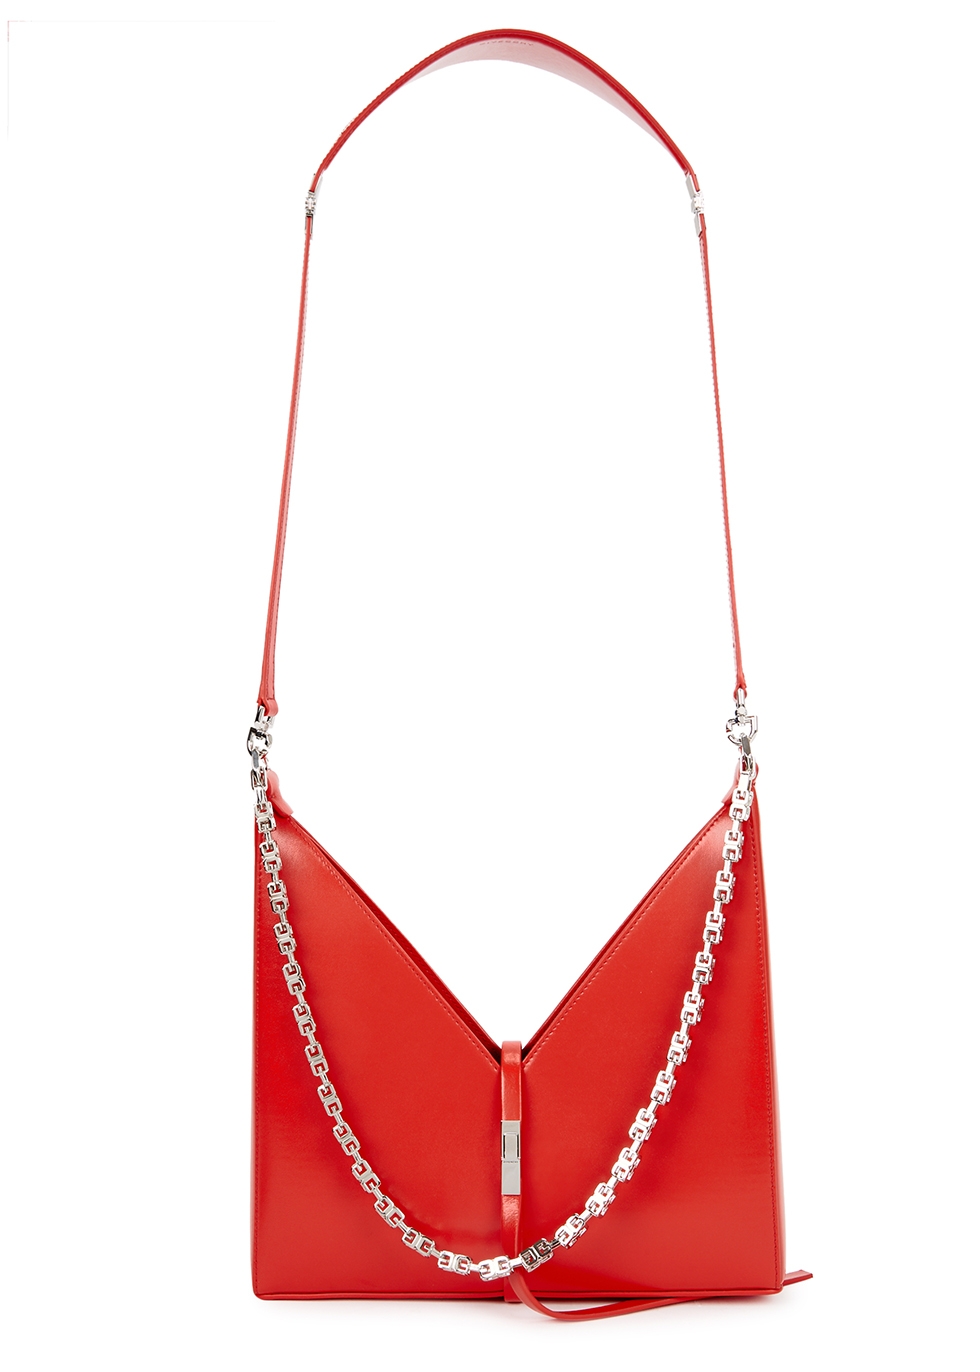 Givenchy Cut Out small leather shoulder bag - Harvey Nichols